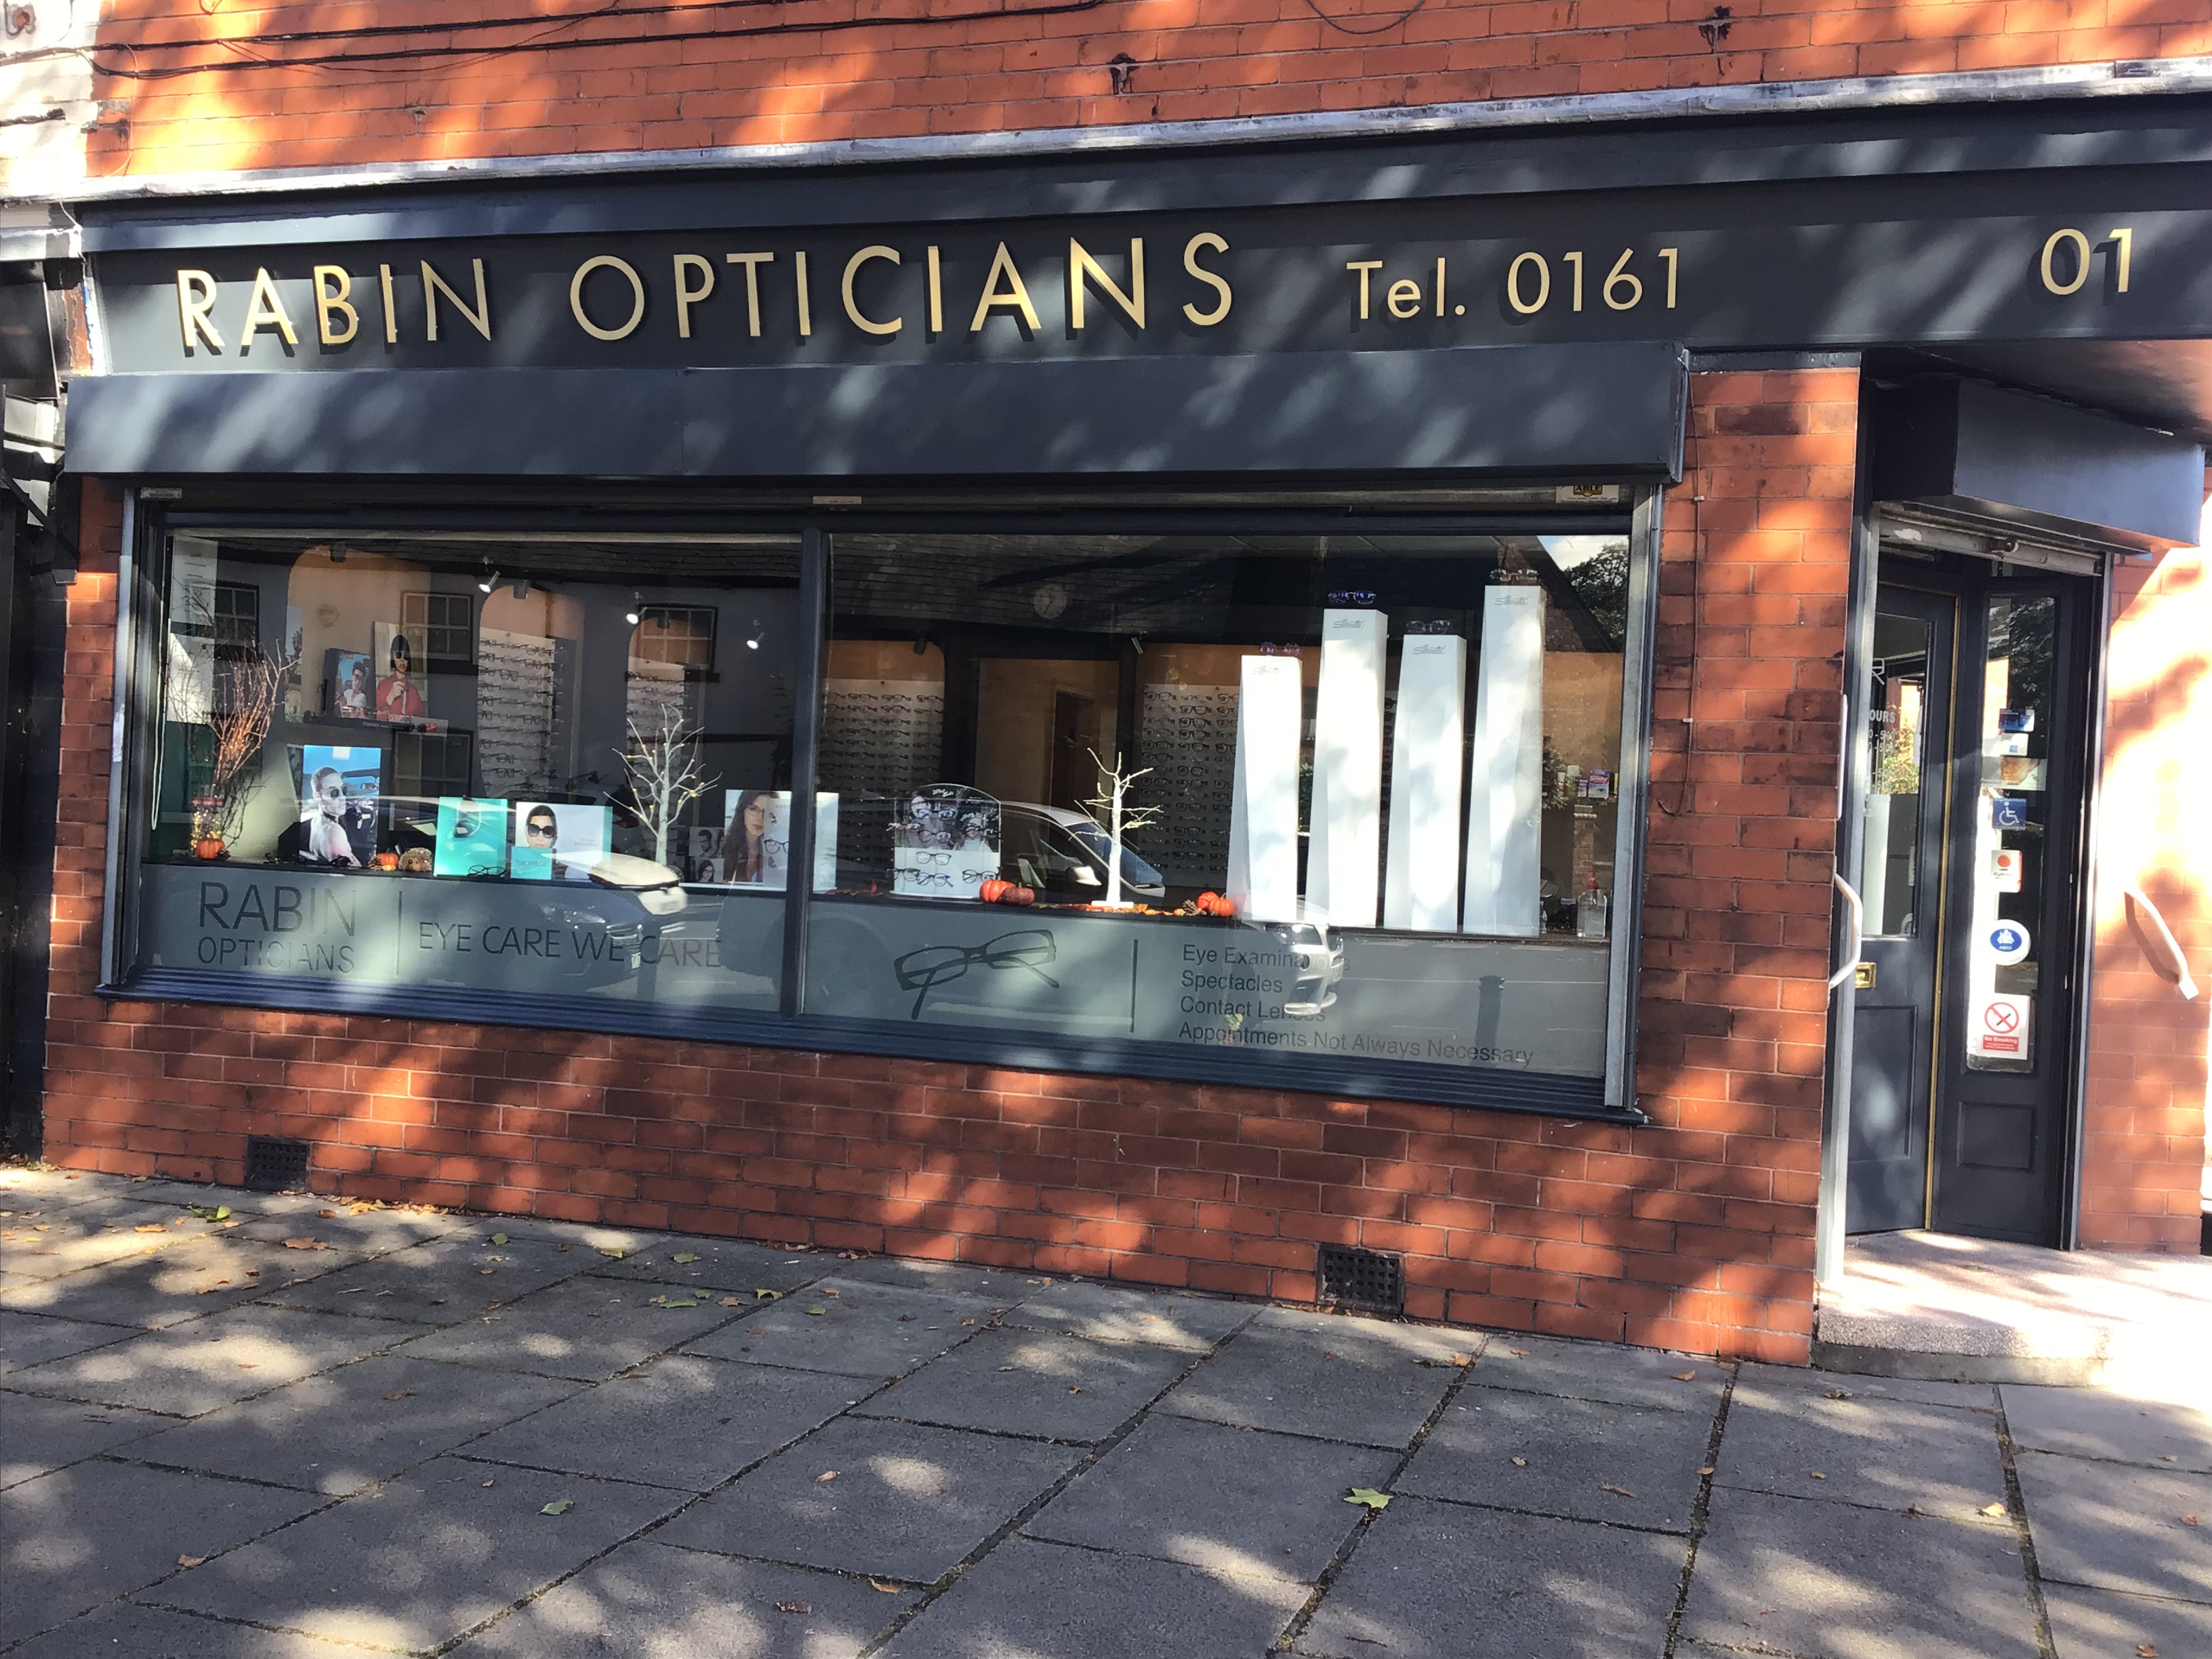 About Rabin Opticians